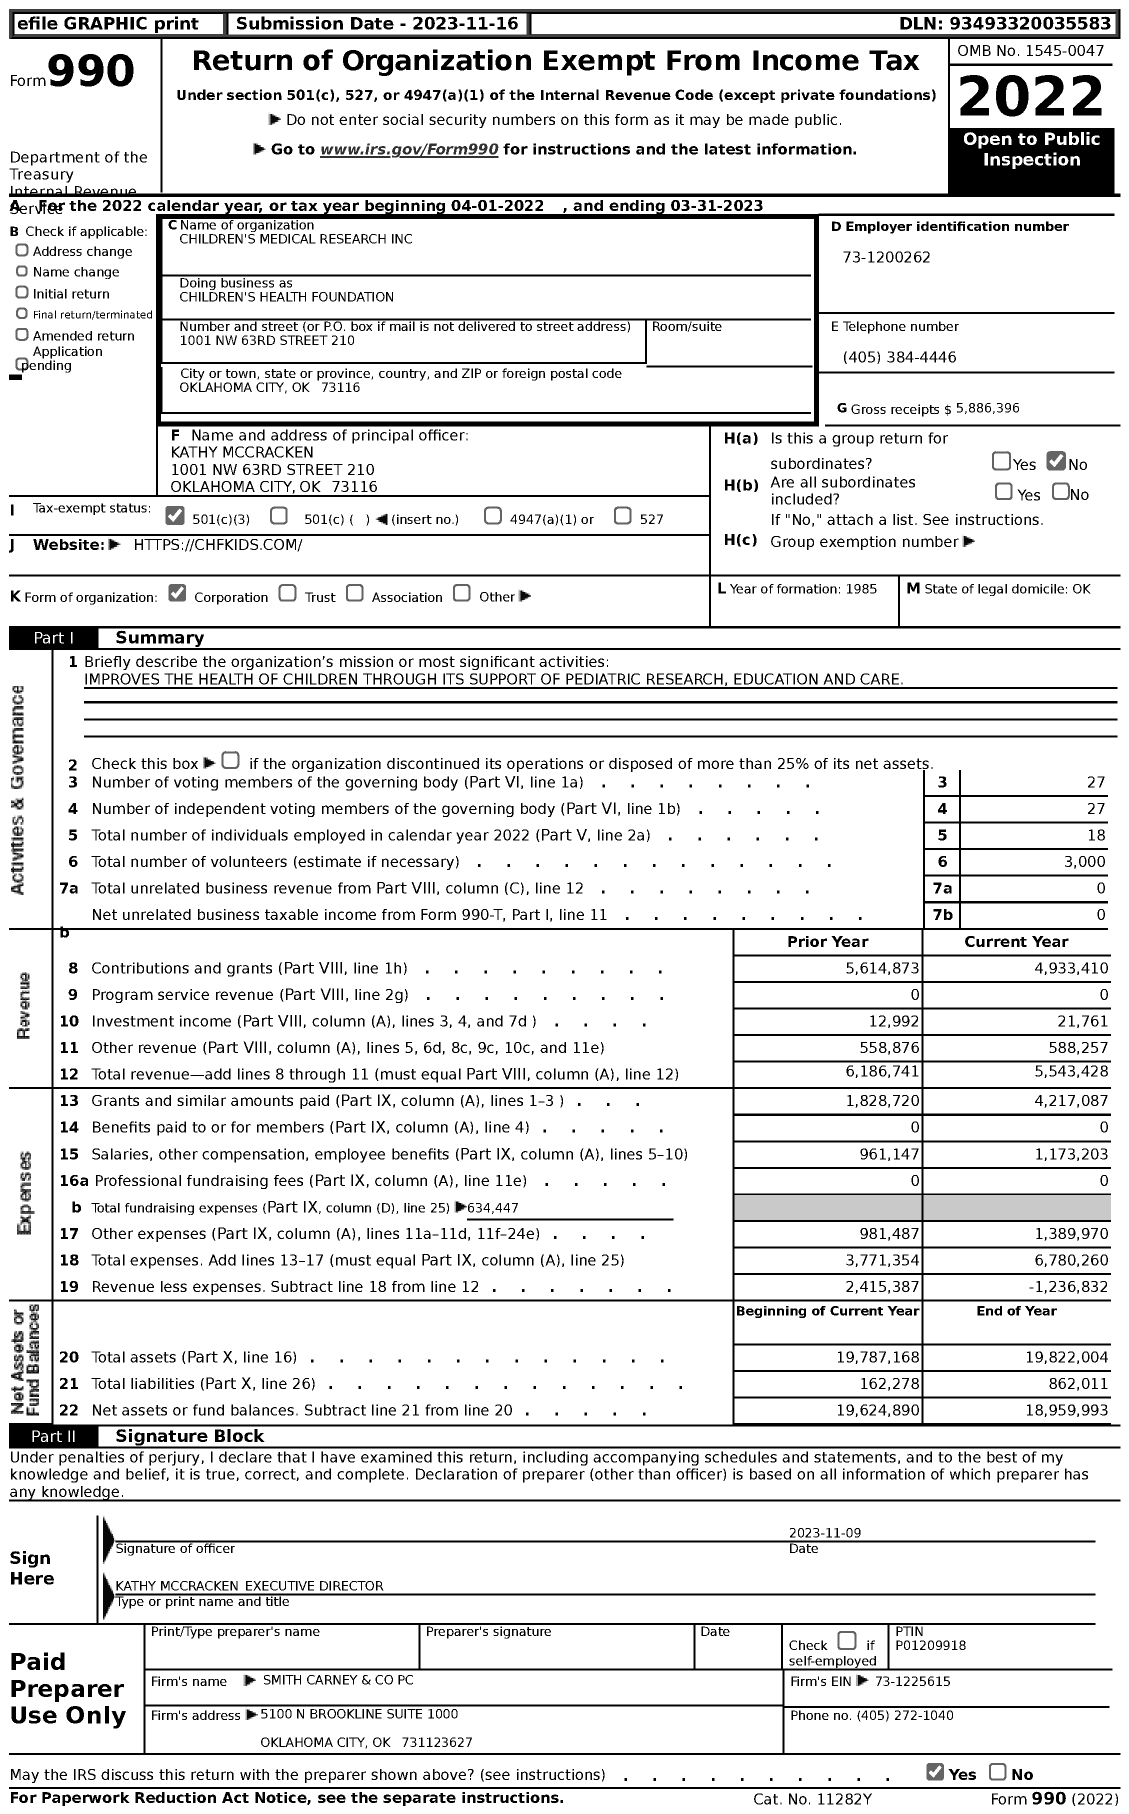 Image of first page of 2022 Form 990 for Children's Health Foundation / Children's Medical Research Inc